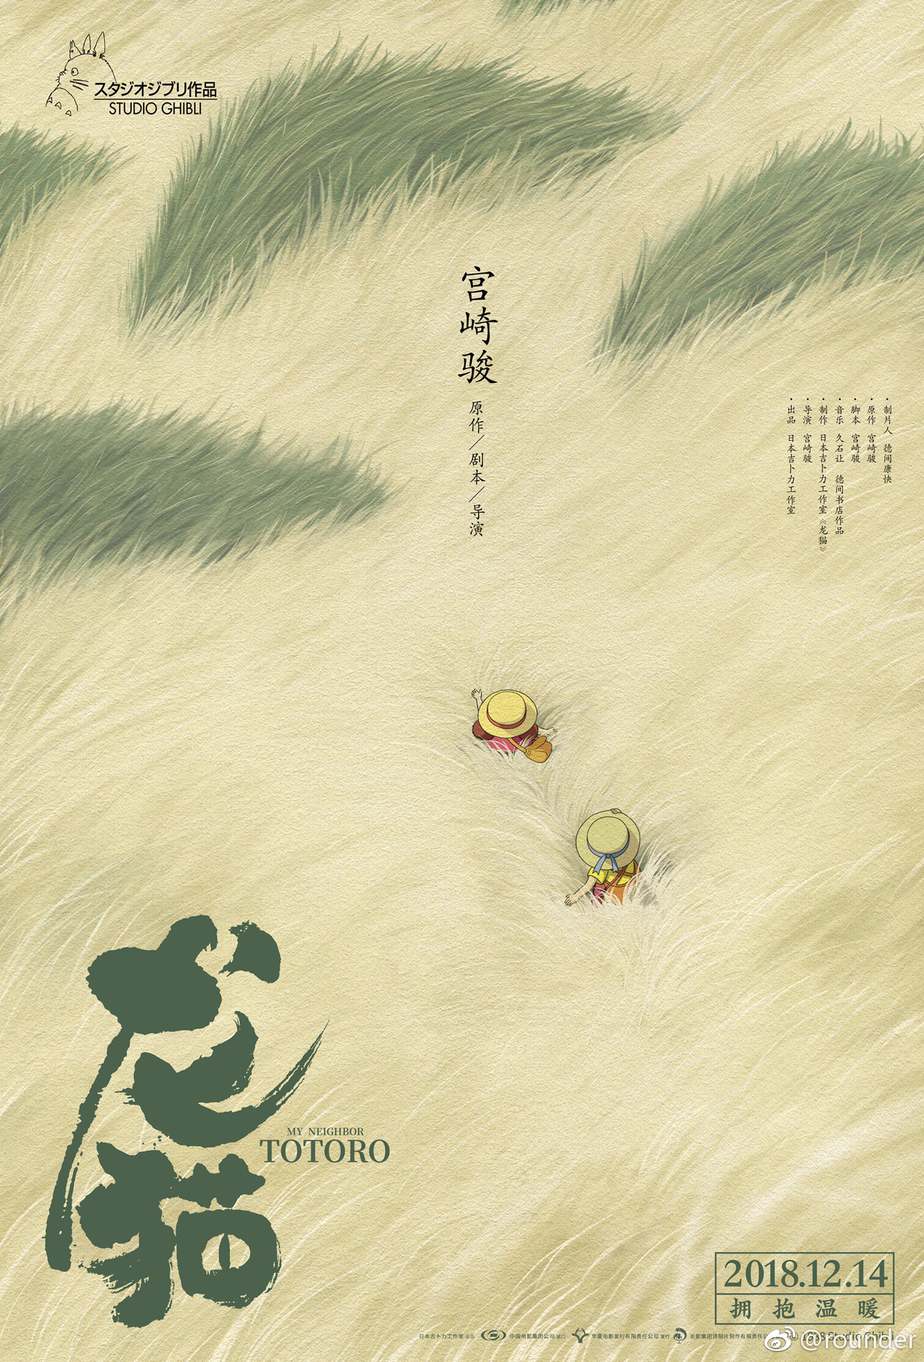 This Chinese film poster by Huang Hai is my favourite.